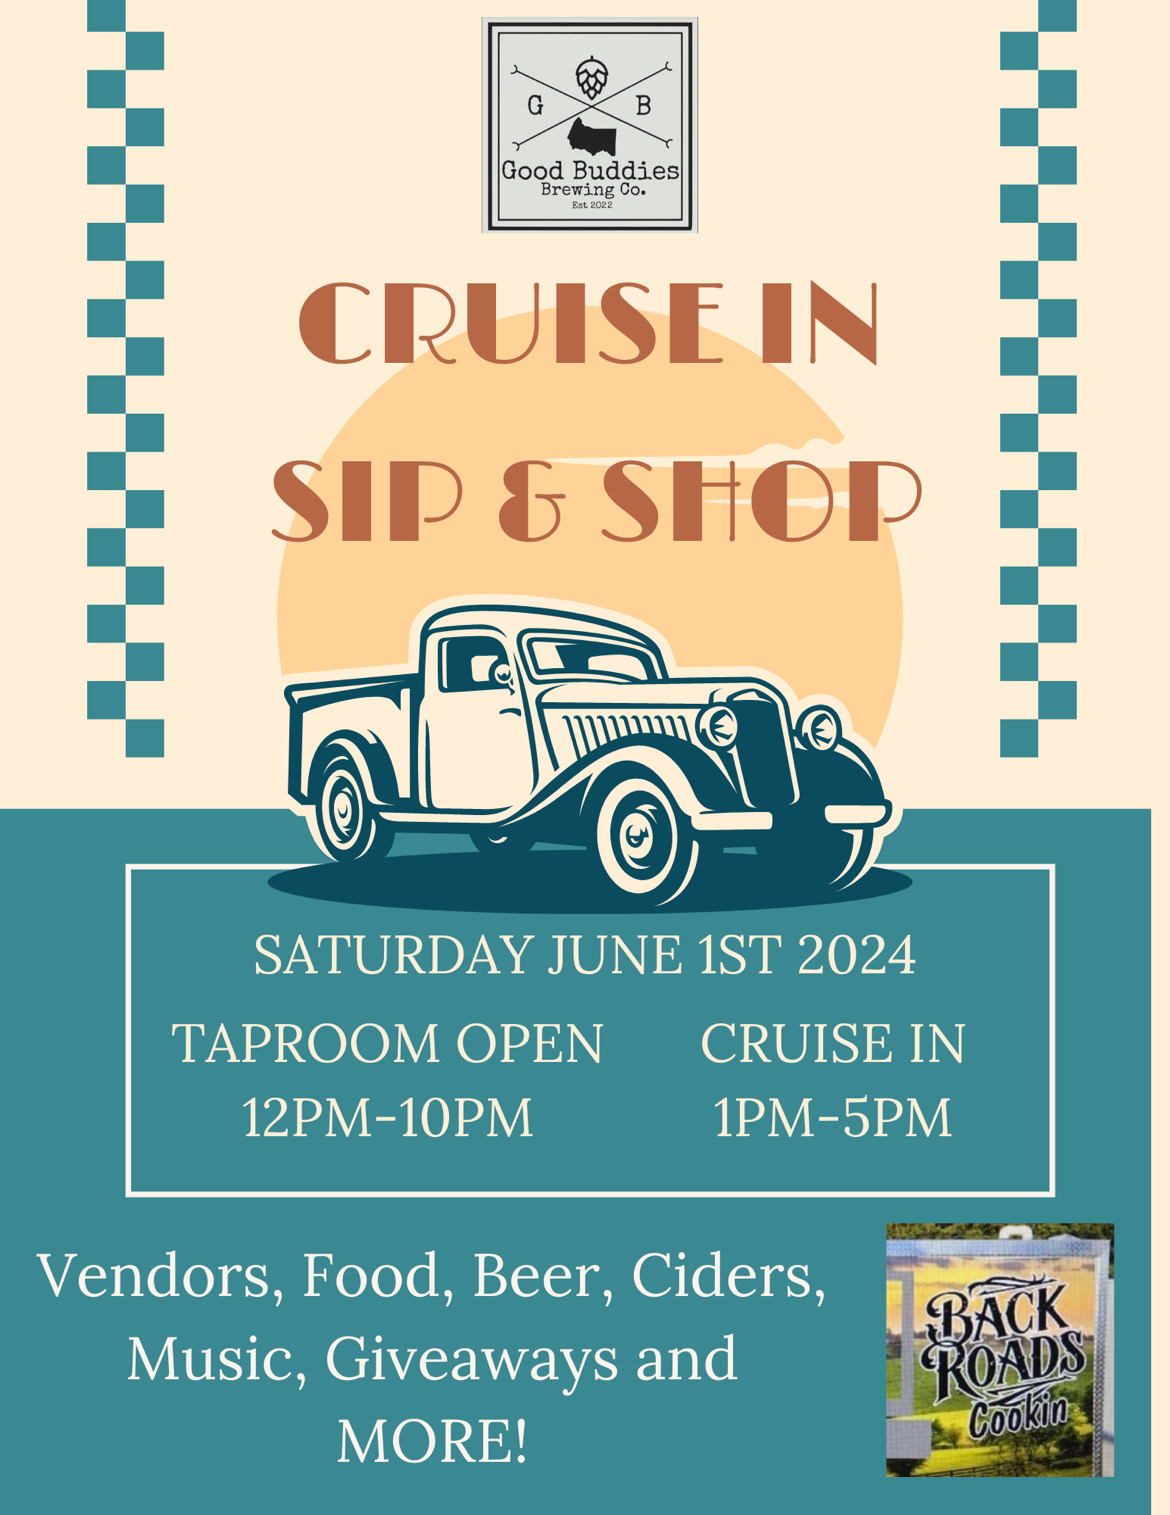 Good Buddies Brewing presents: Cruise In/ Sip and Shop